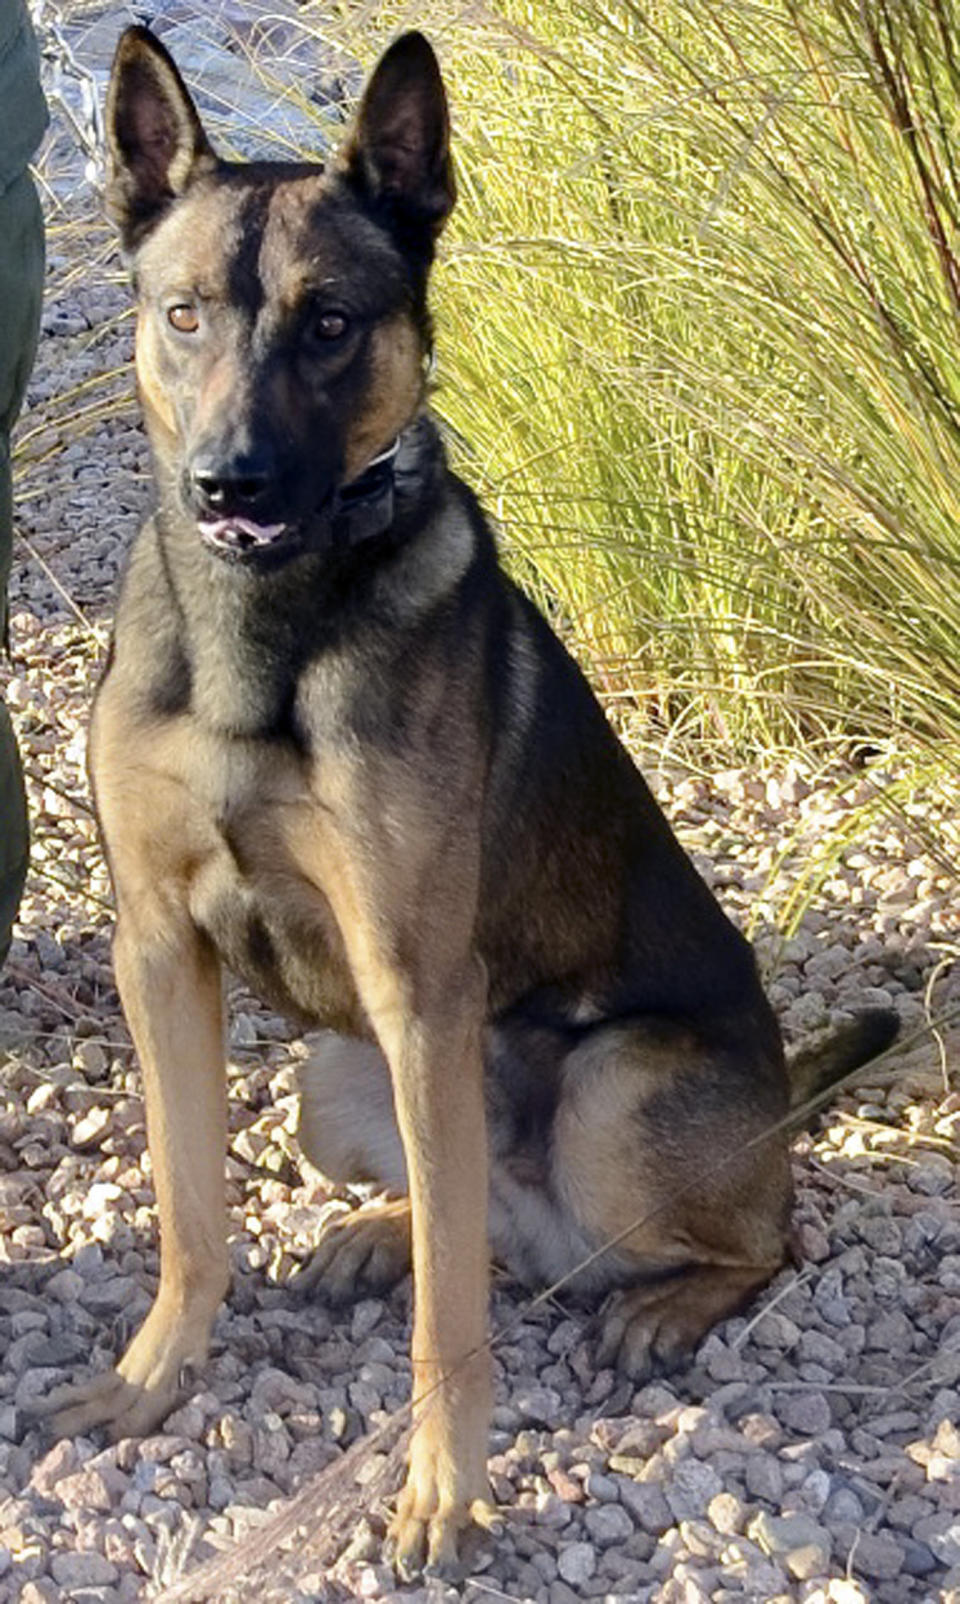 This image provided by the Albuquerque Police Department shows police K-9 dog, "Rico,"  who was shot Friday March 21, 2014 during a standoff with a suspected burglar. Albuquerque police say they've found the body of a dead person at a business where a police dog was shot and wounded during the operation as officers responded to a reported burglary Friday morning. The dog is undergoing surgery for multiple wounds. (AP Photo/Courtesy of the Albuquerque Police Department)